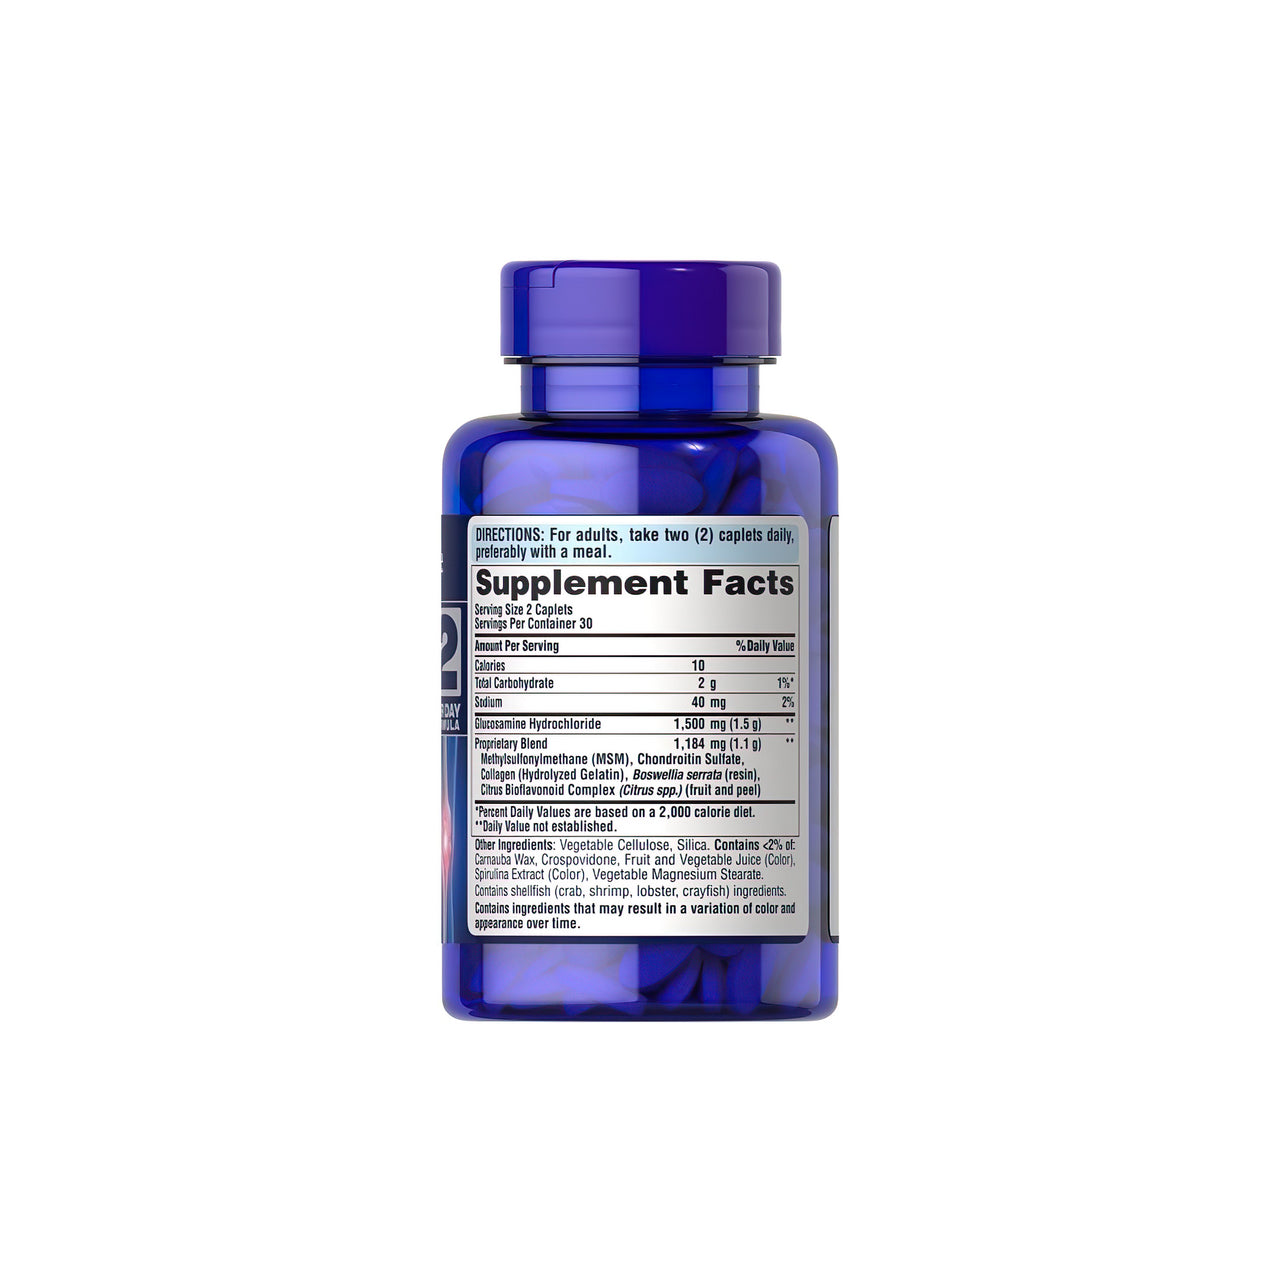 A bottle of Puritan's Pride Triple Strength Glucosamine, Chondroitin & MSM 60 coated caplets on a white background.